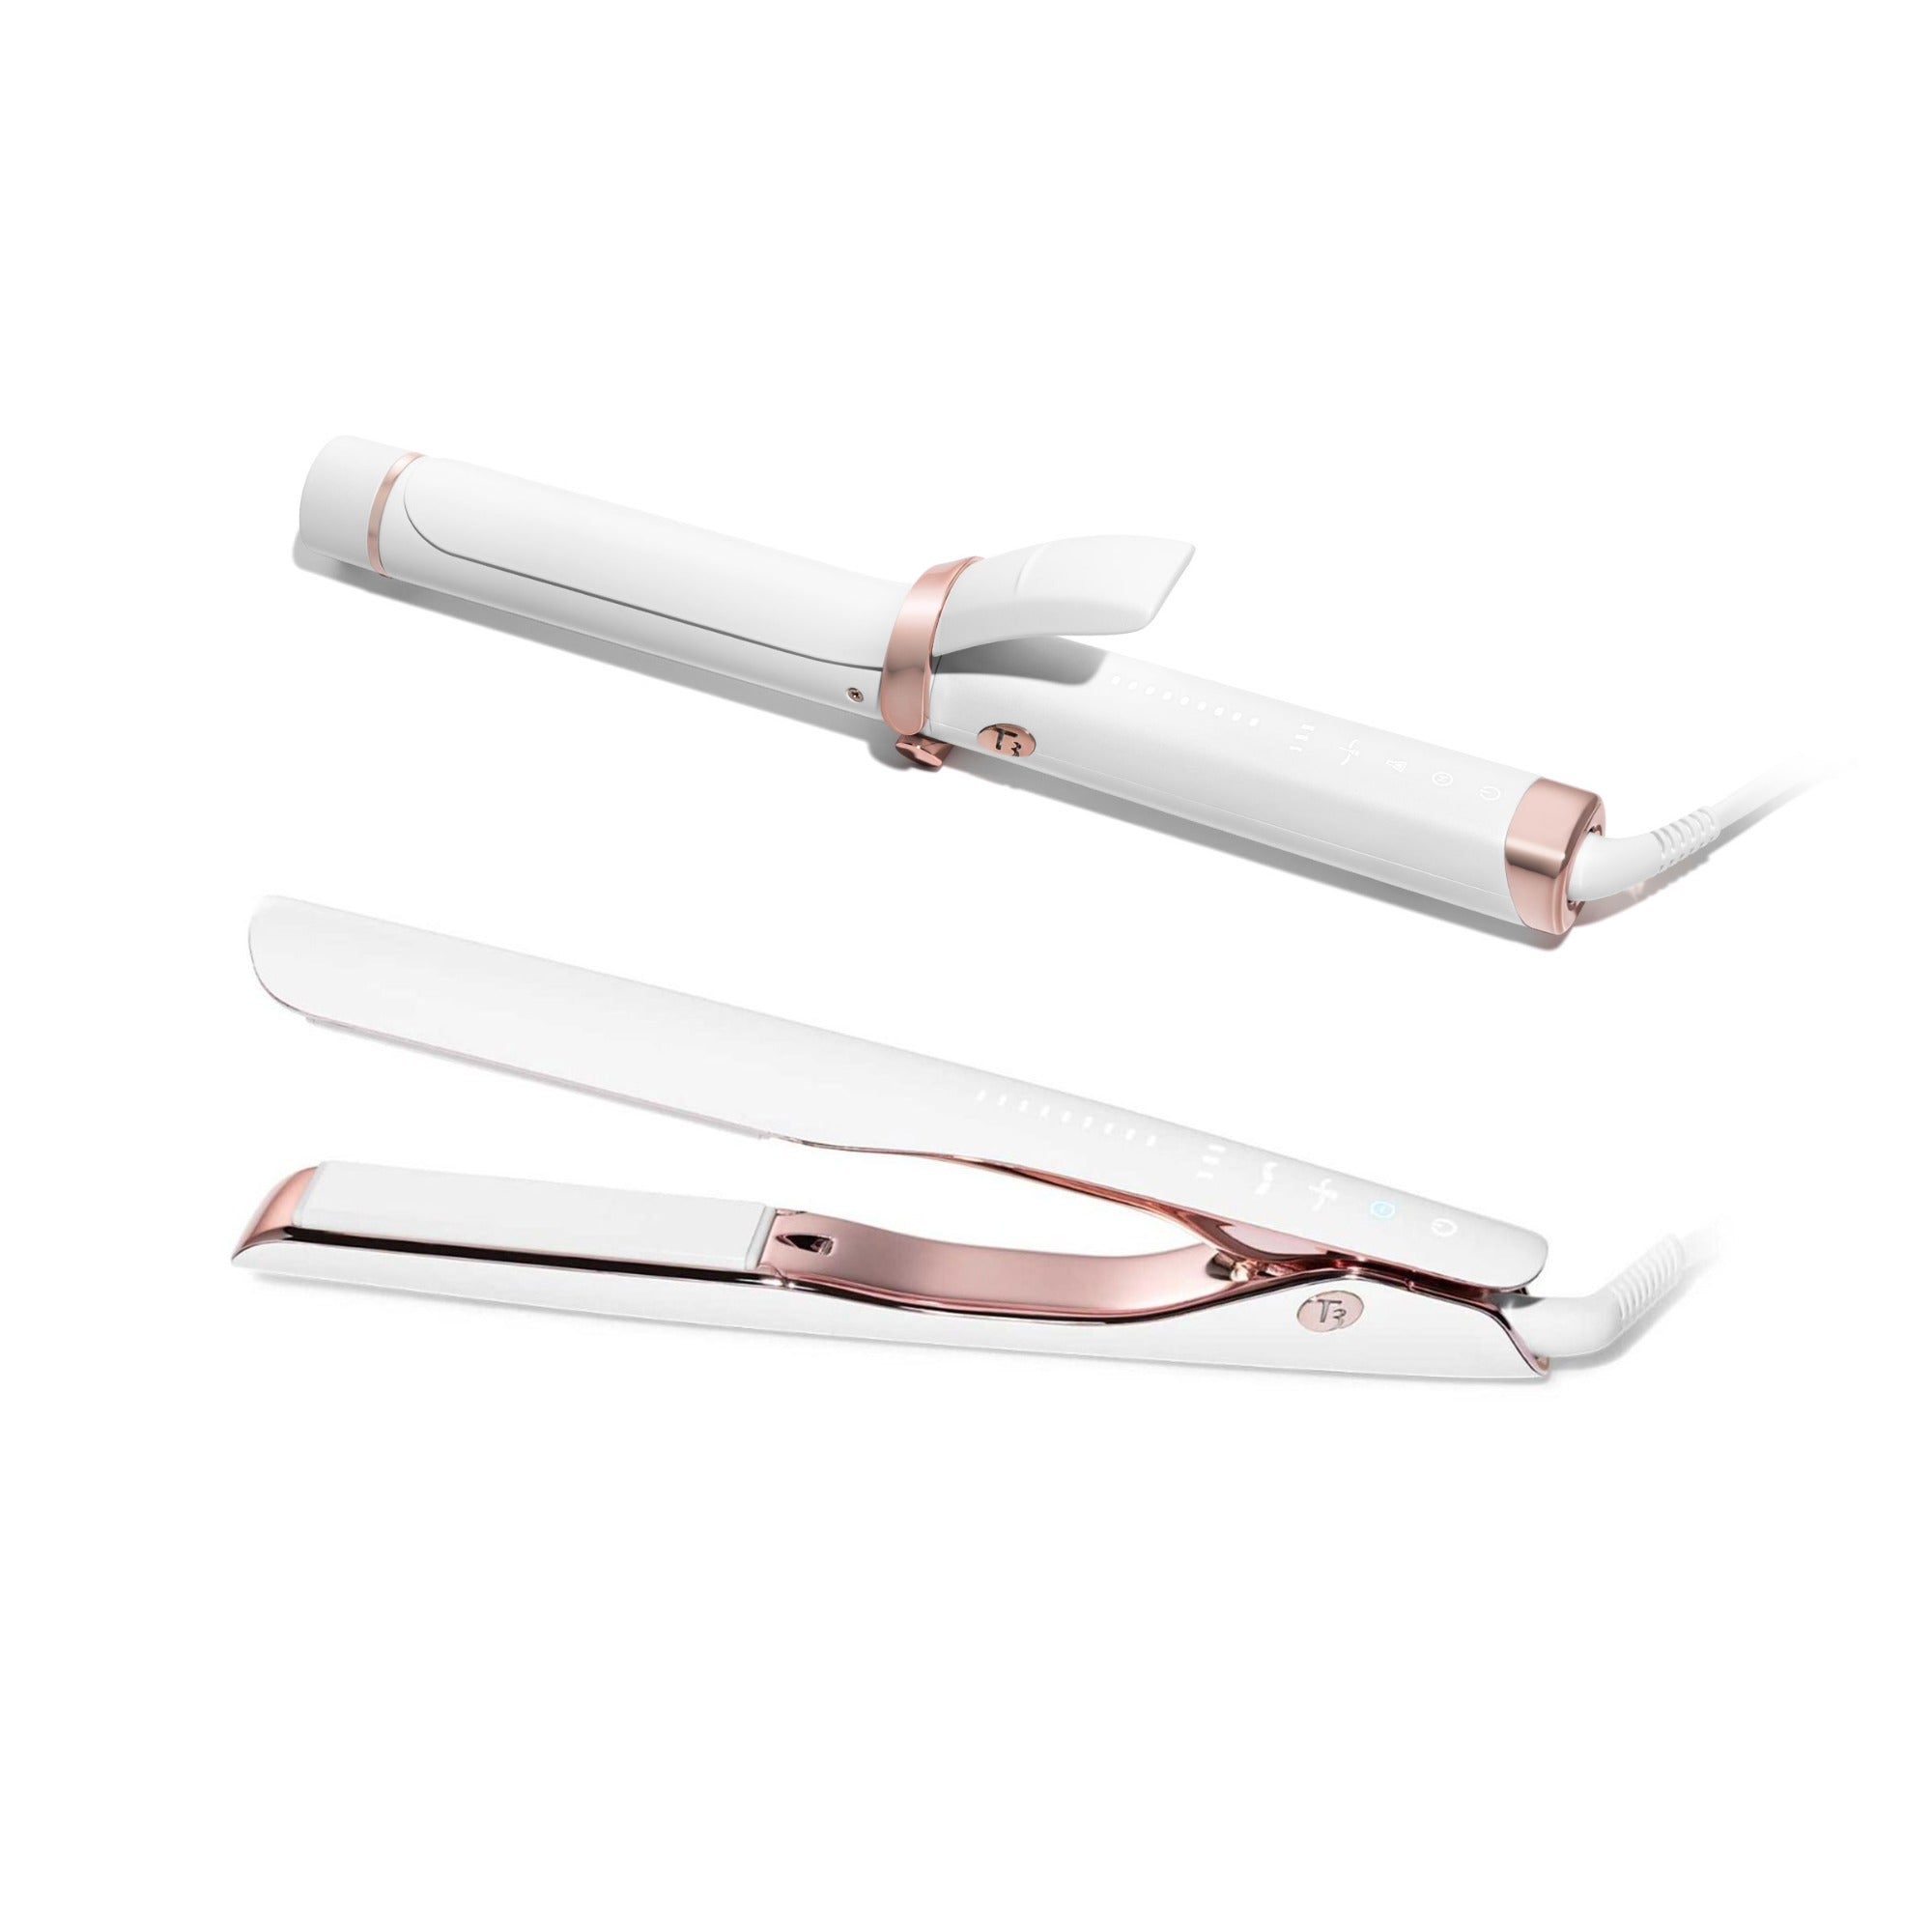 T3 Smooth ID smart flat iron + T3 Curl ID smart curling iron in one set, Heat ID Styling Duo